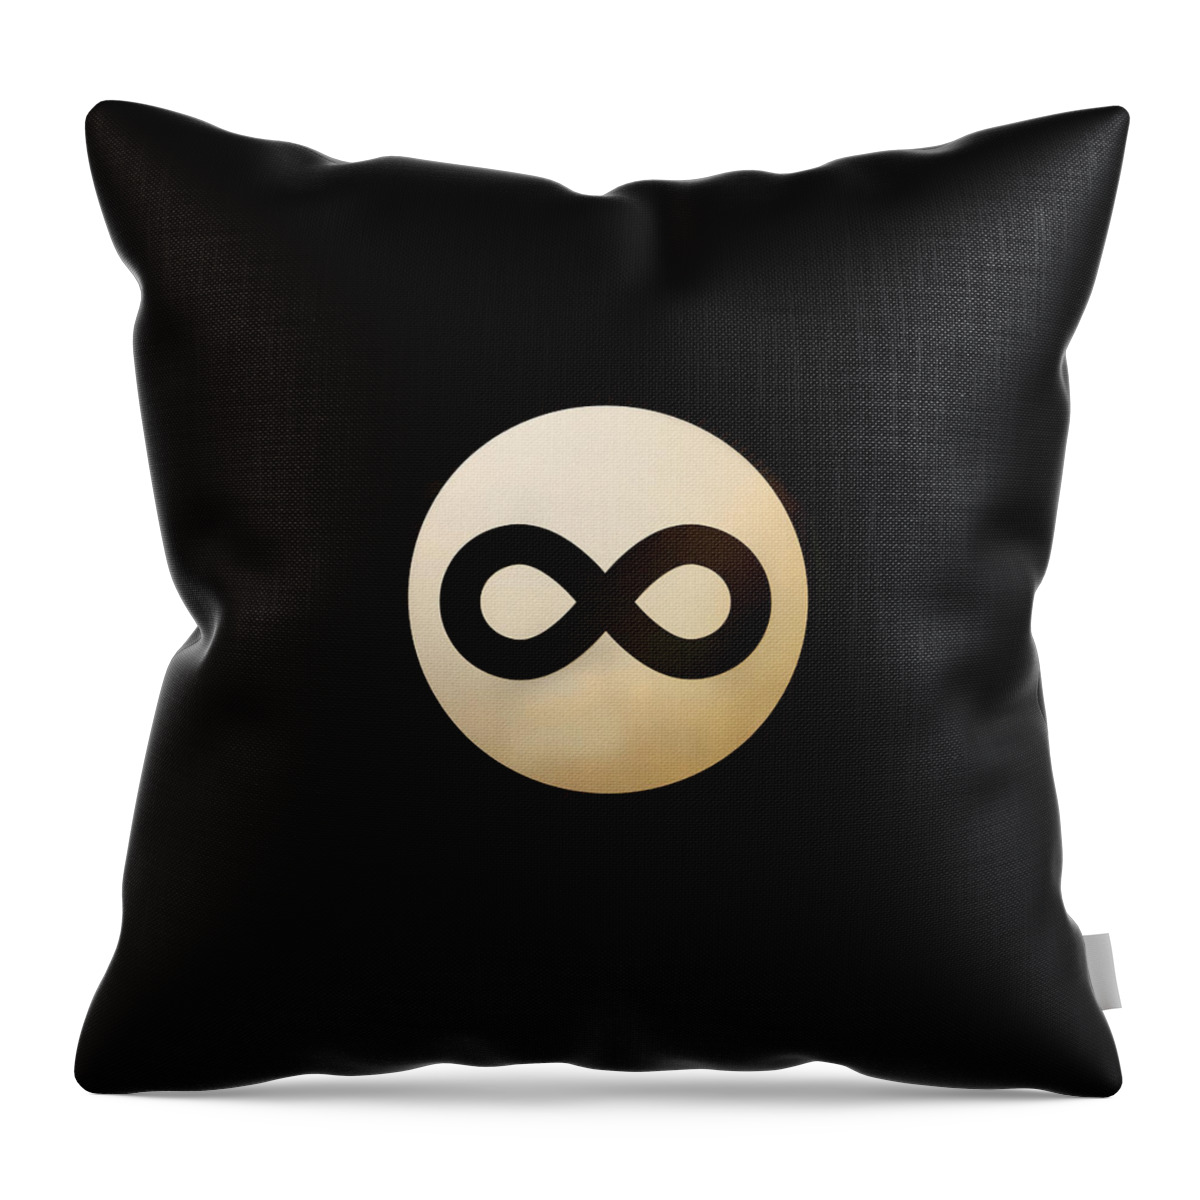 Snooker Throw Pillow featuring the digital art Infinity Ball by Nicholas Ely